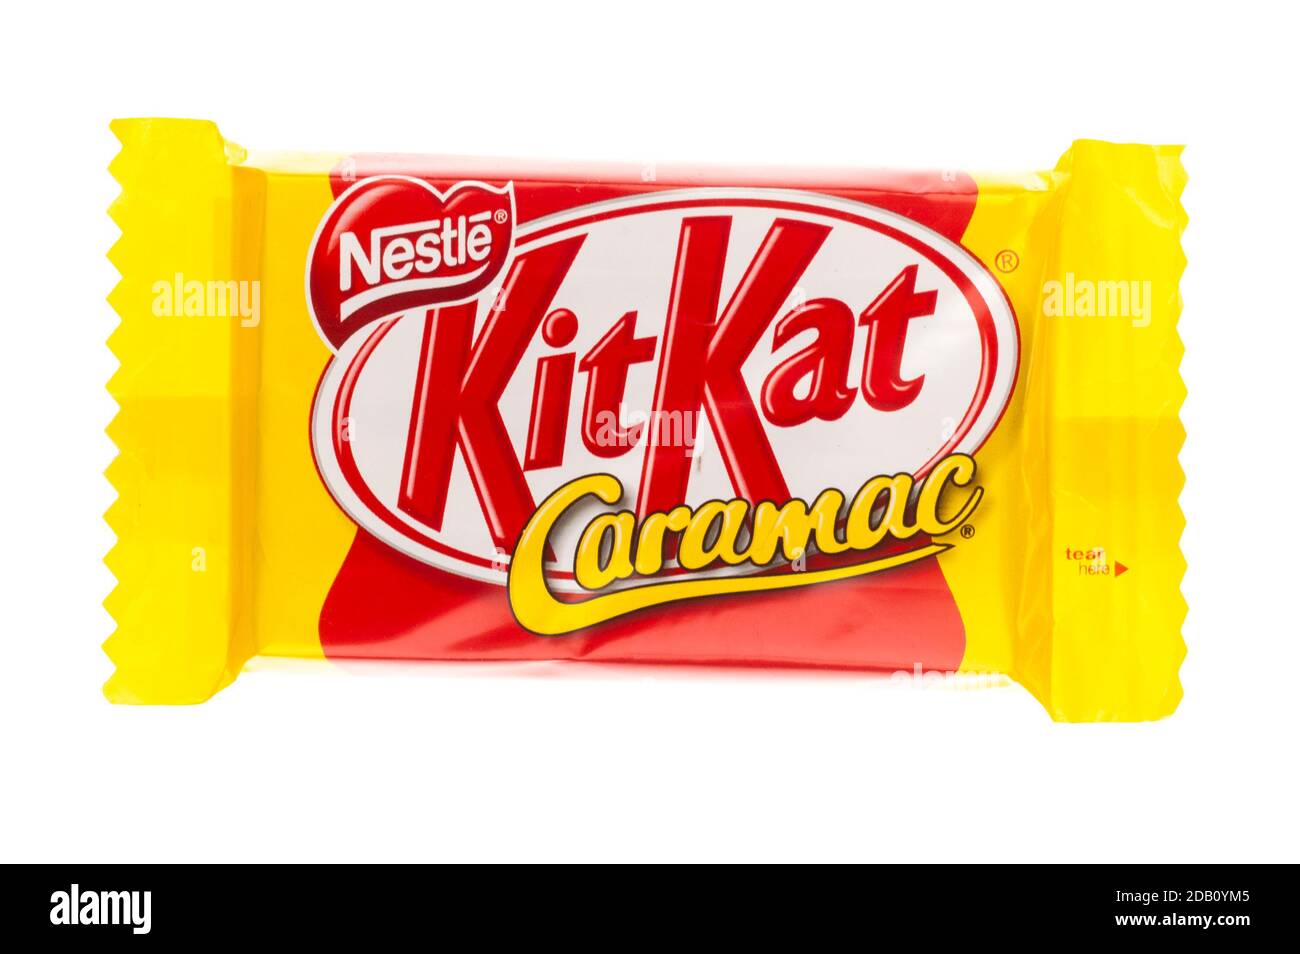 Kit Kat Caramac Chocolate Bar, Made by Nestle in the United Kingdom Stock Photo